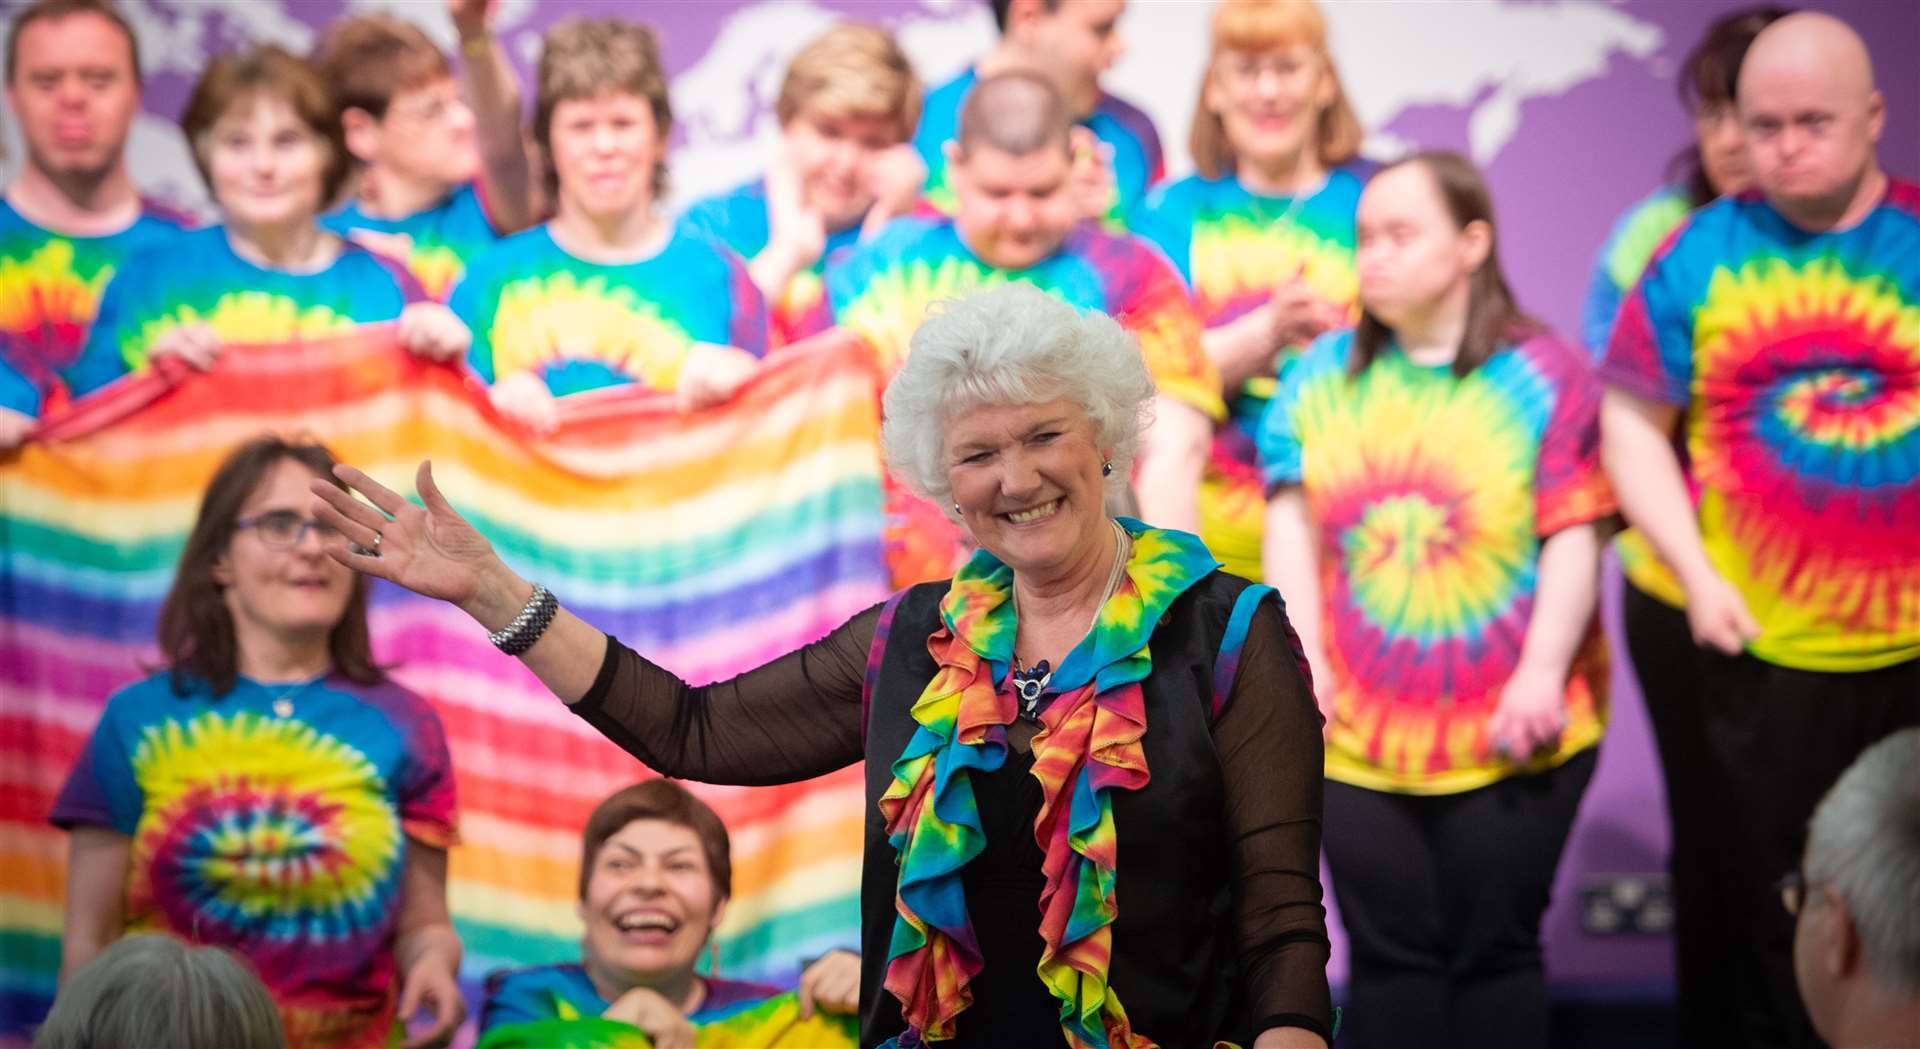 The Rainbow Singers in action at a fundraising concert for charity in Inverness.